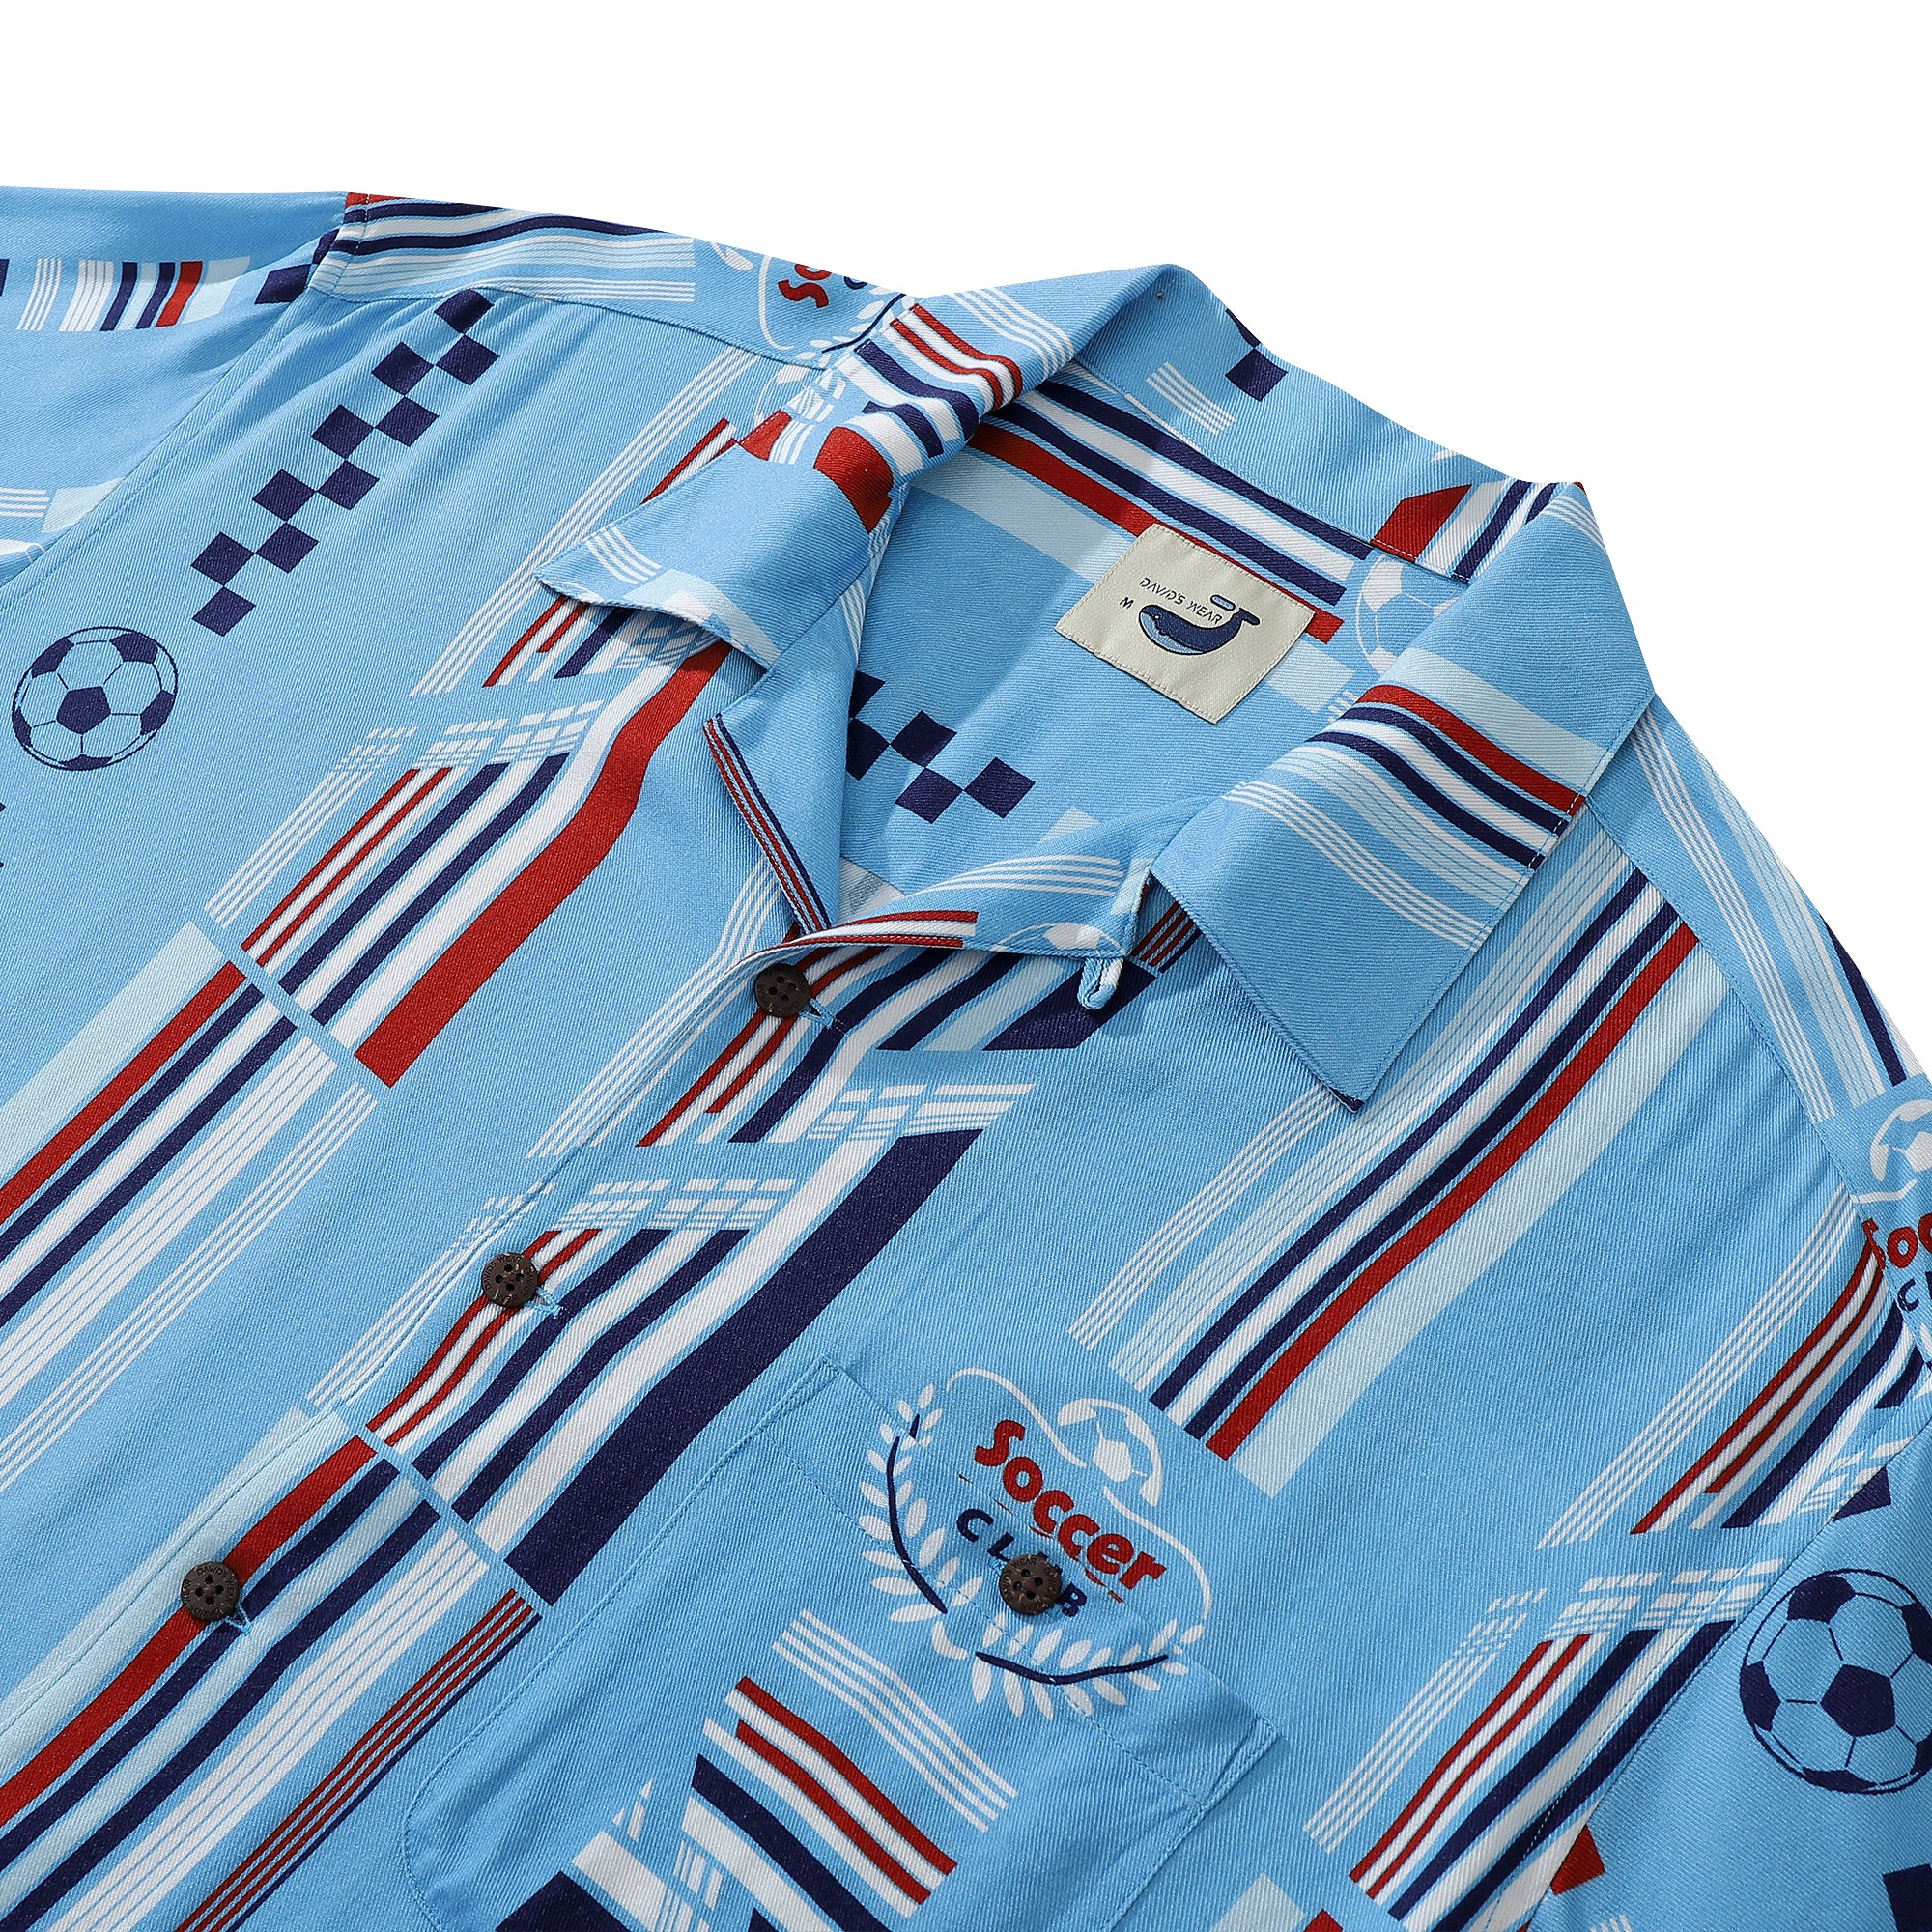 Soccer Lover 100% Rayon Short-Sleeve Shirt With Camp Collar